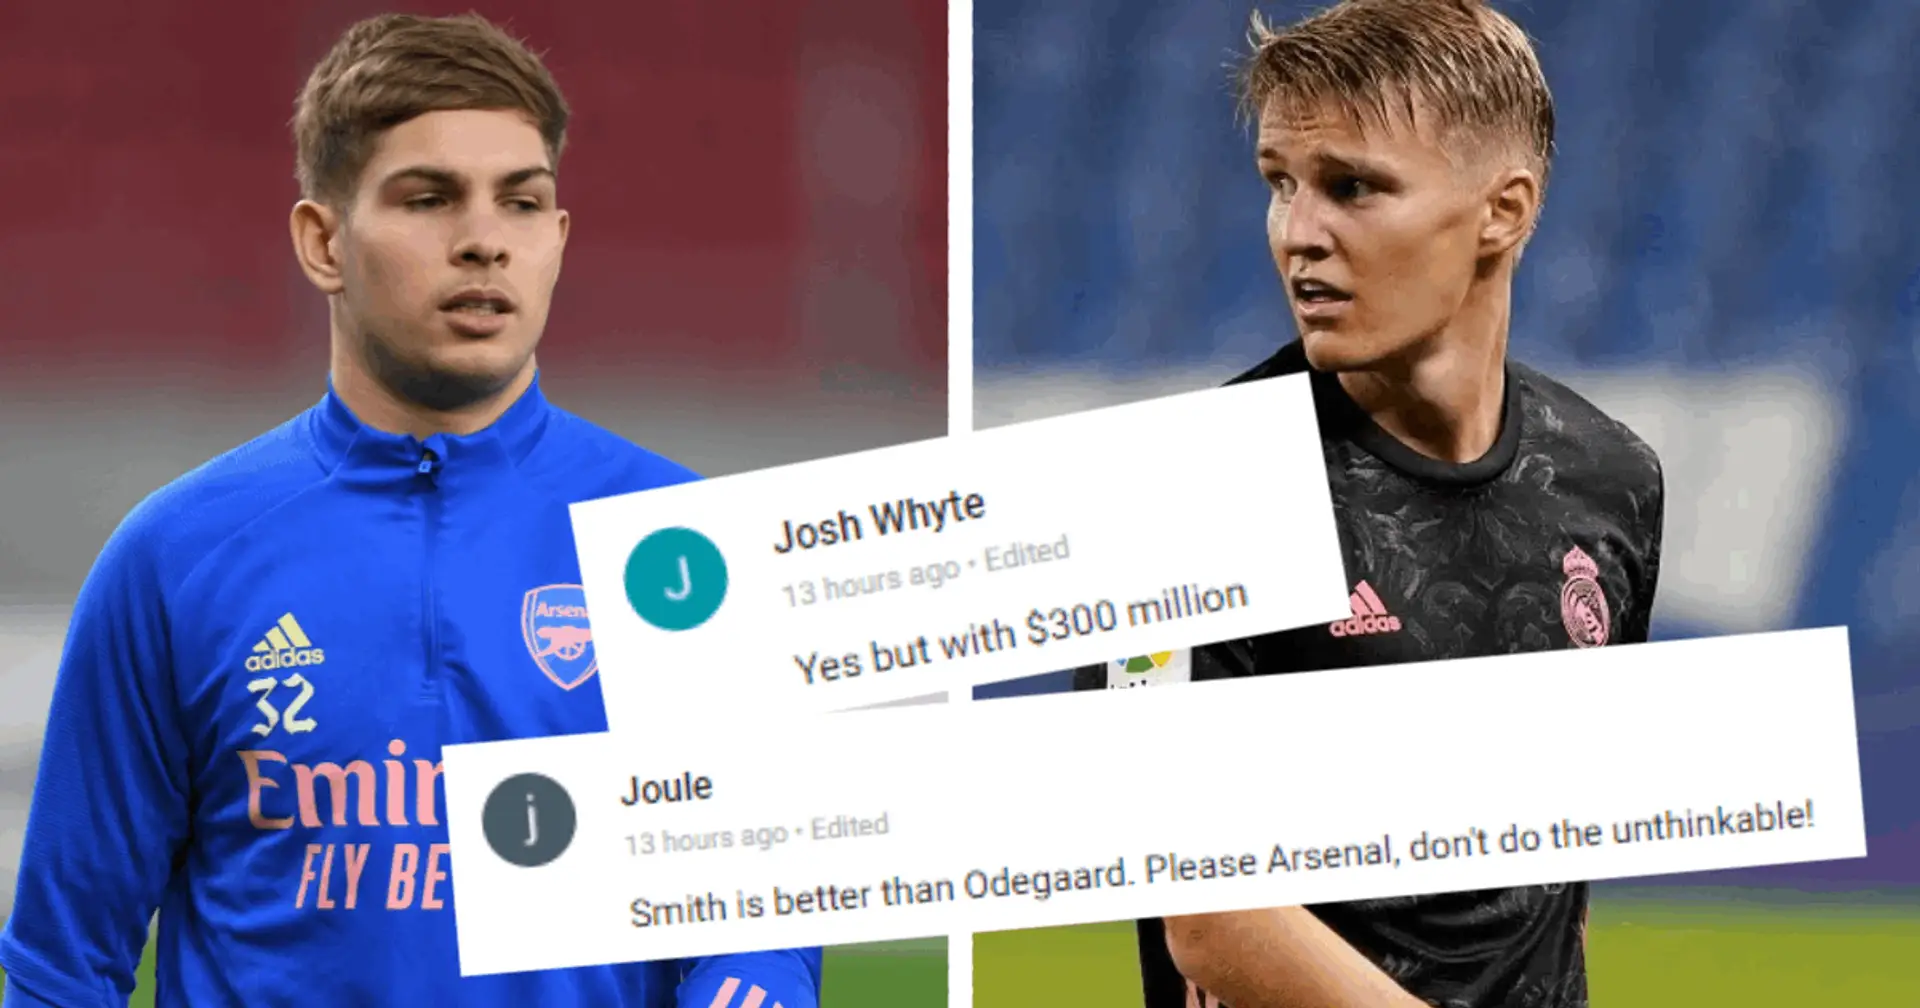 'Biggest joke of this transfer market': Tribuna fans react to Real Madrid's reported interest in swapping Smith Rowe for Odegaard